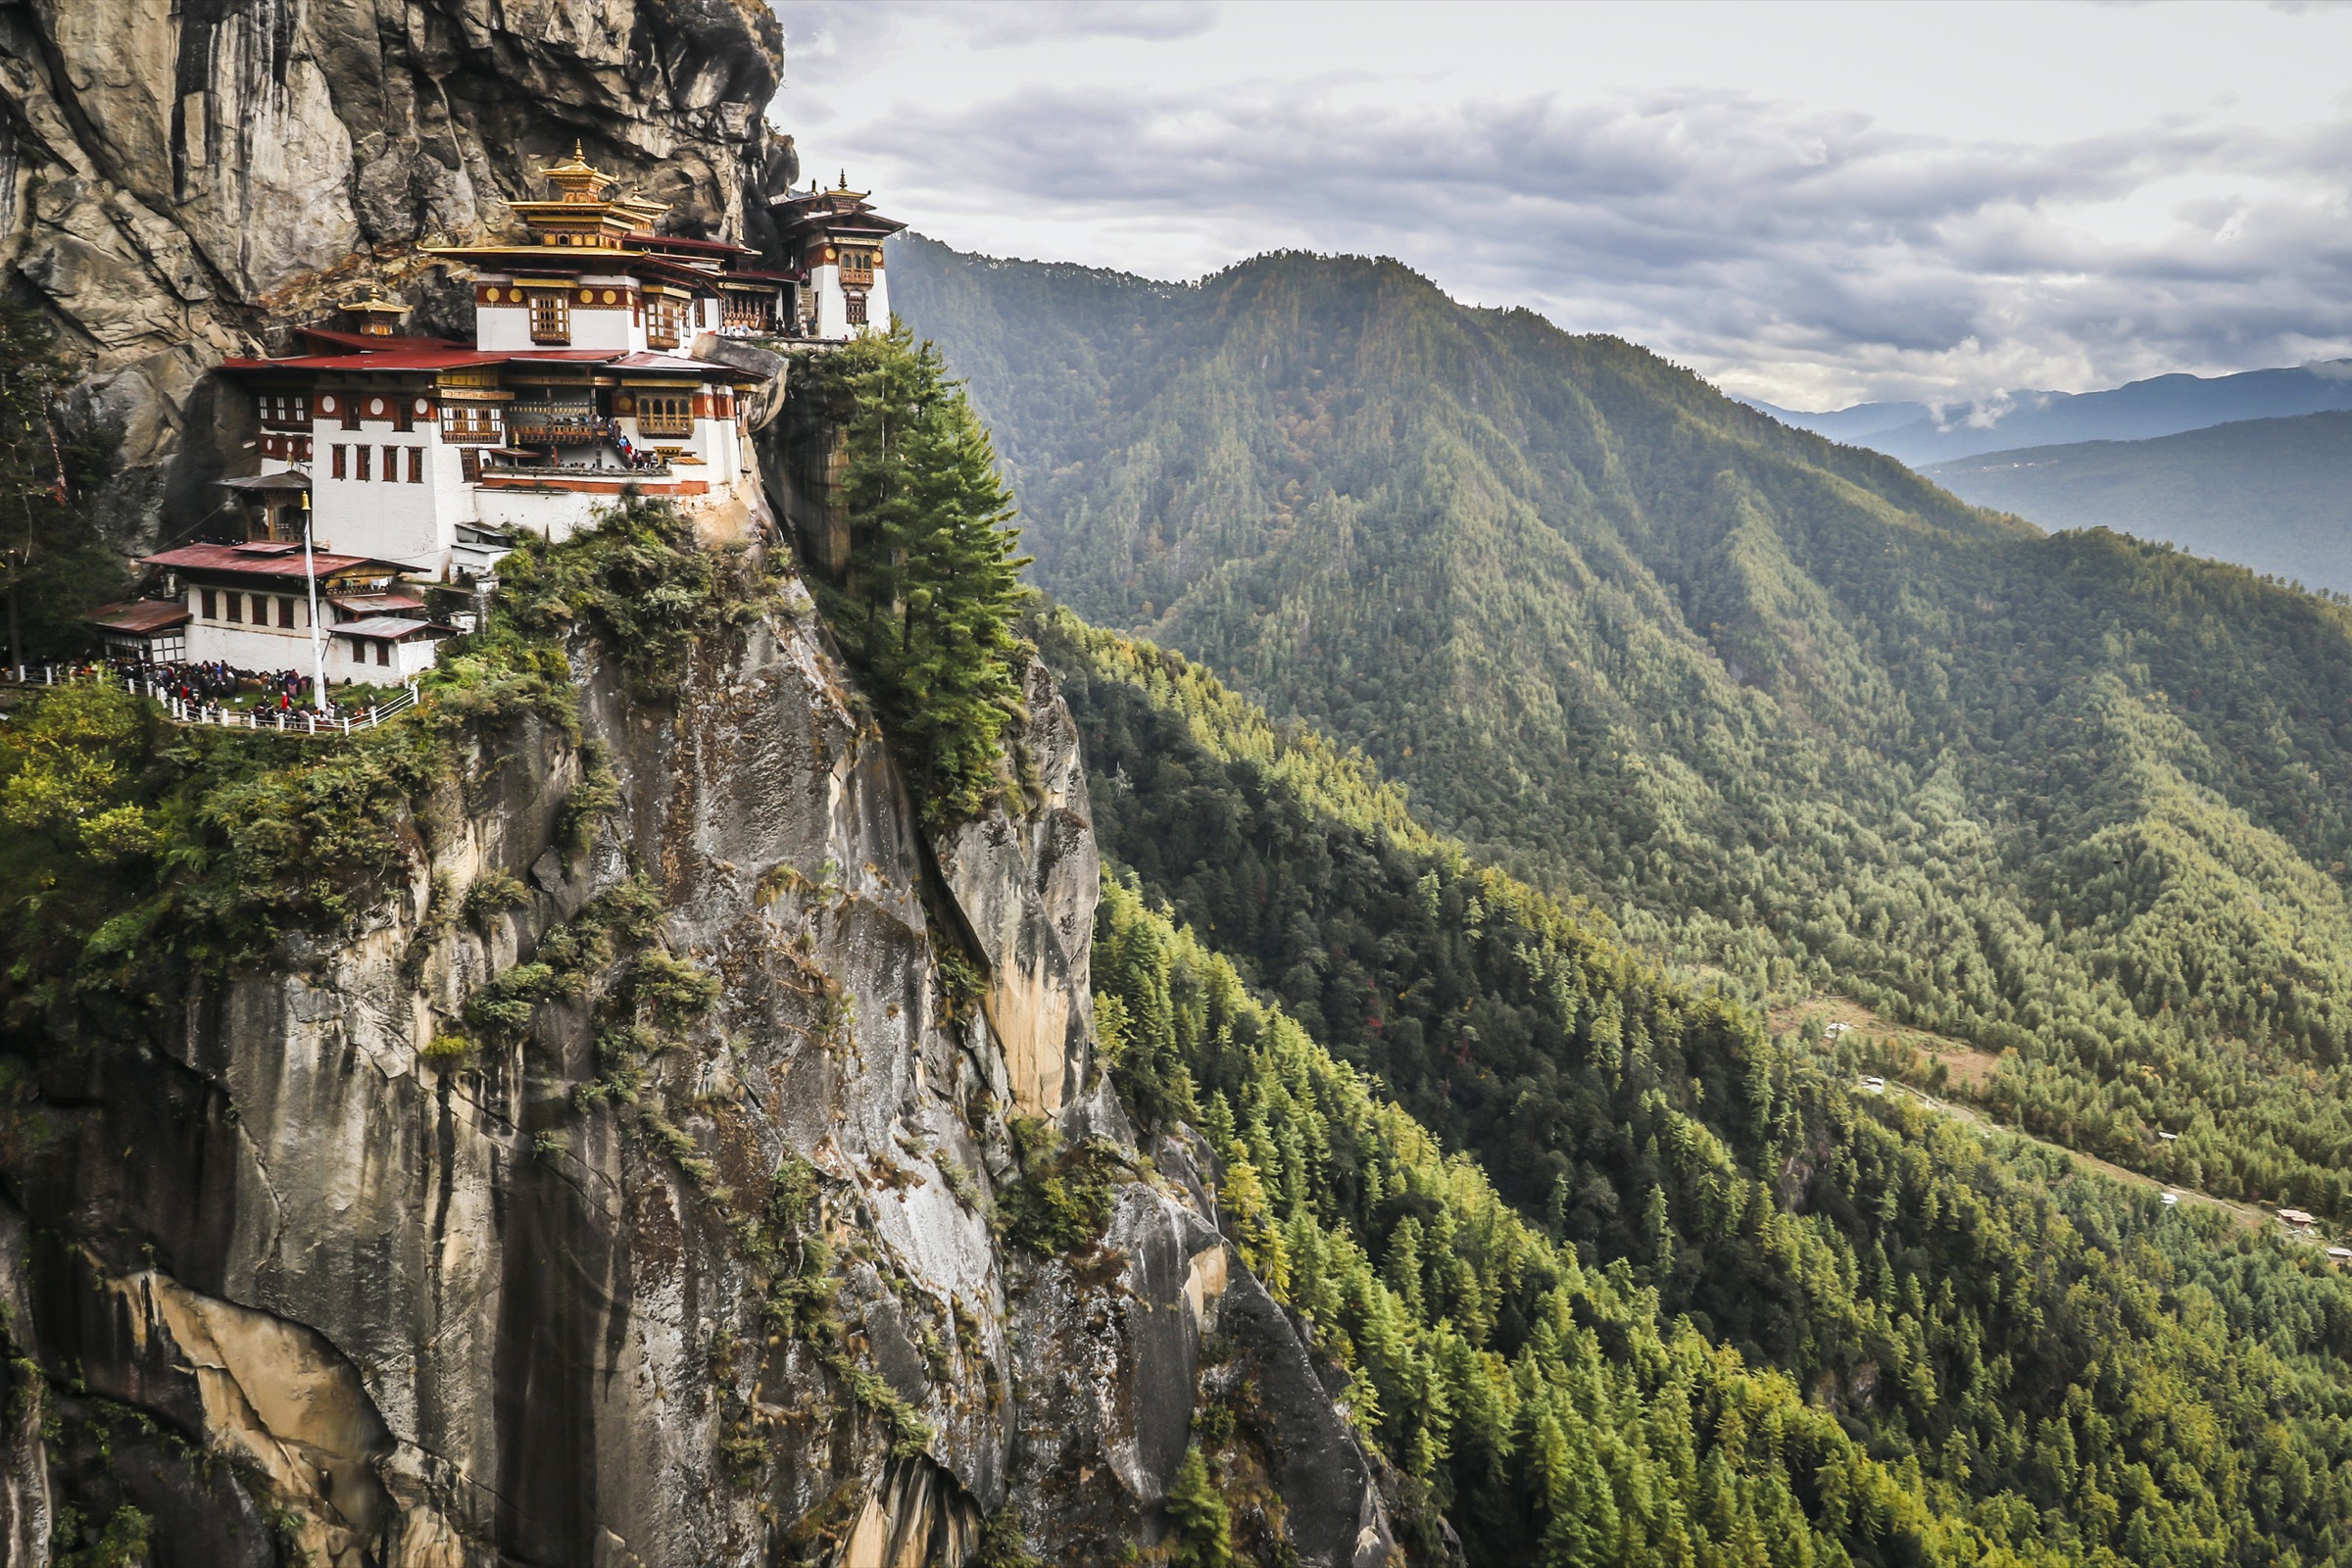 The Taktsang Monastery above the Paro Valley in Bhutan. (Suzanne Stroeer—Getty Images)